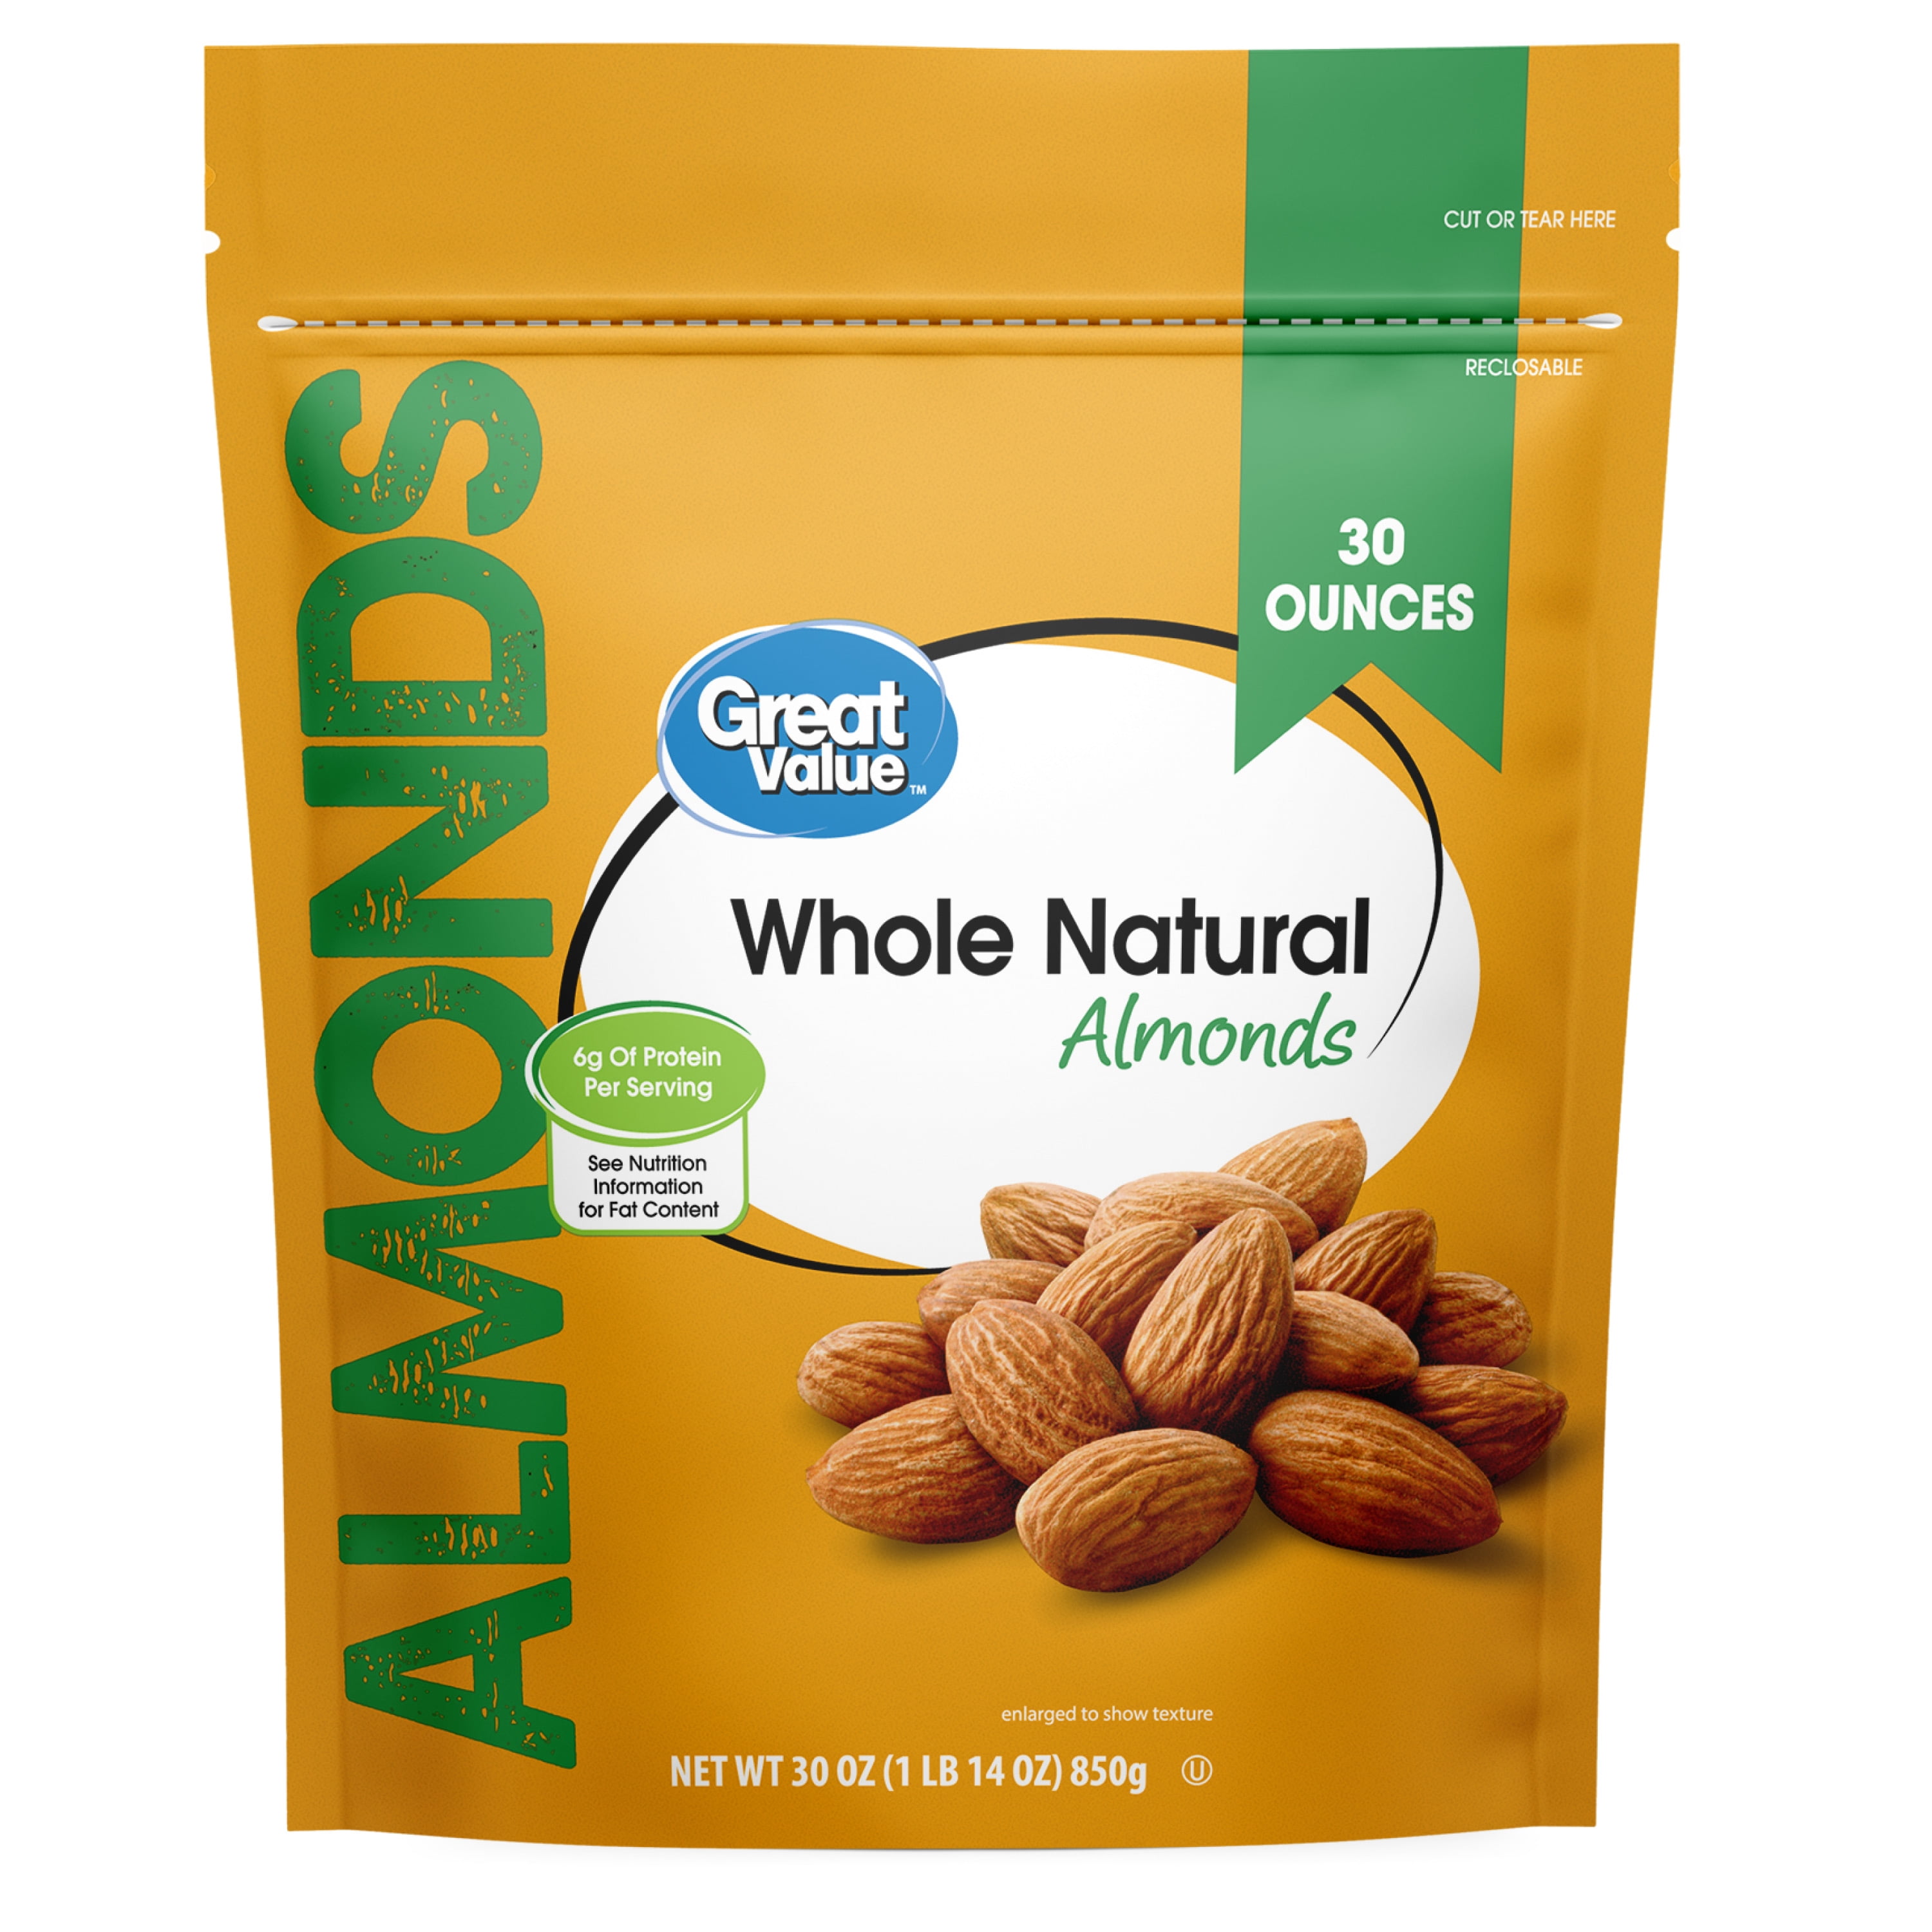 Great Value Natural Whole Almonds, 30 oz